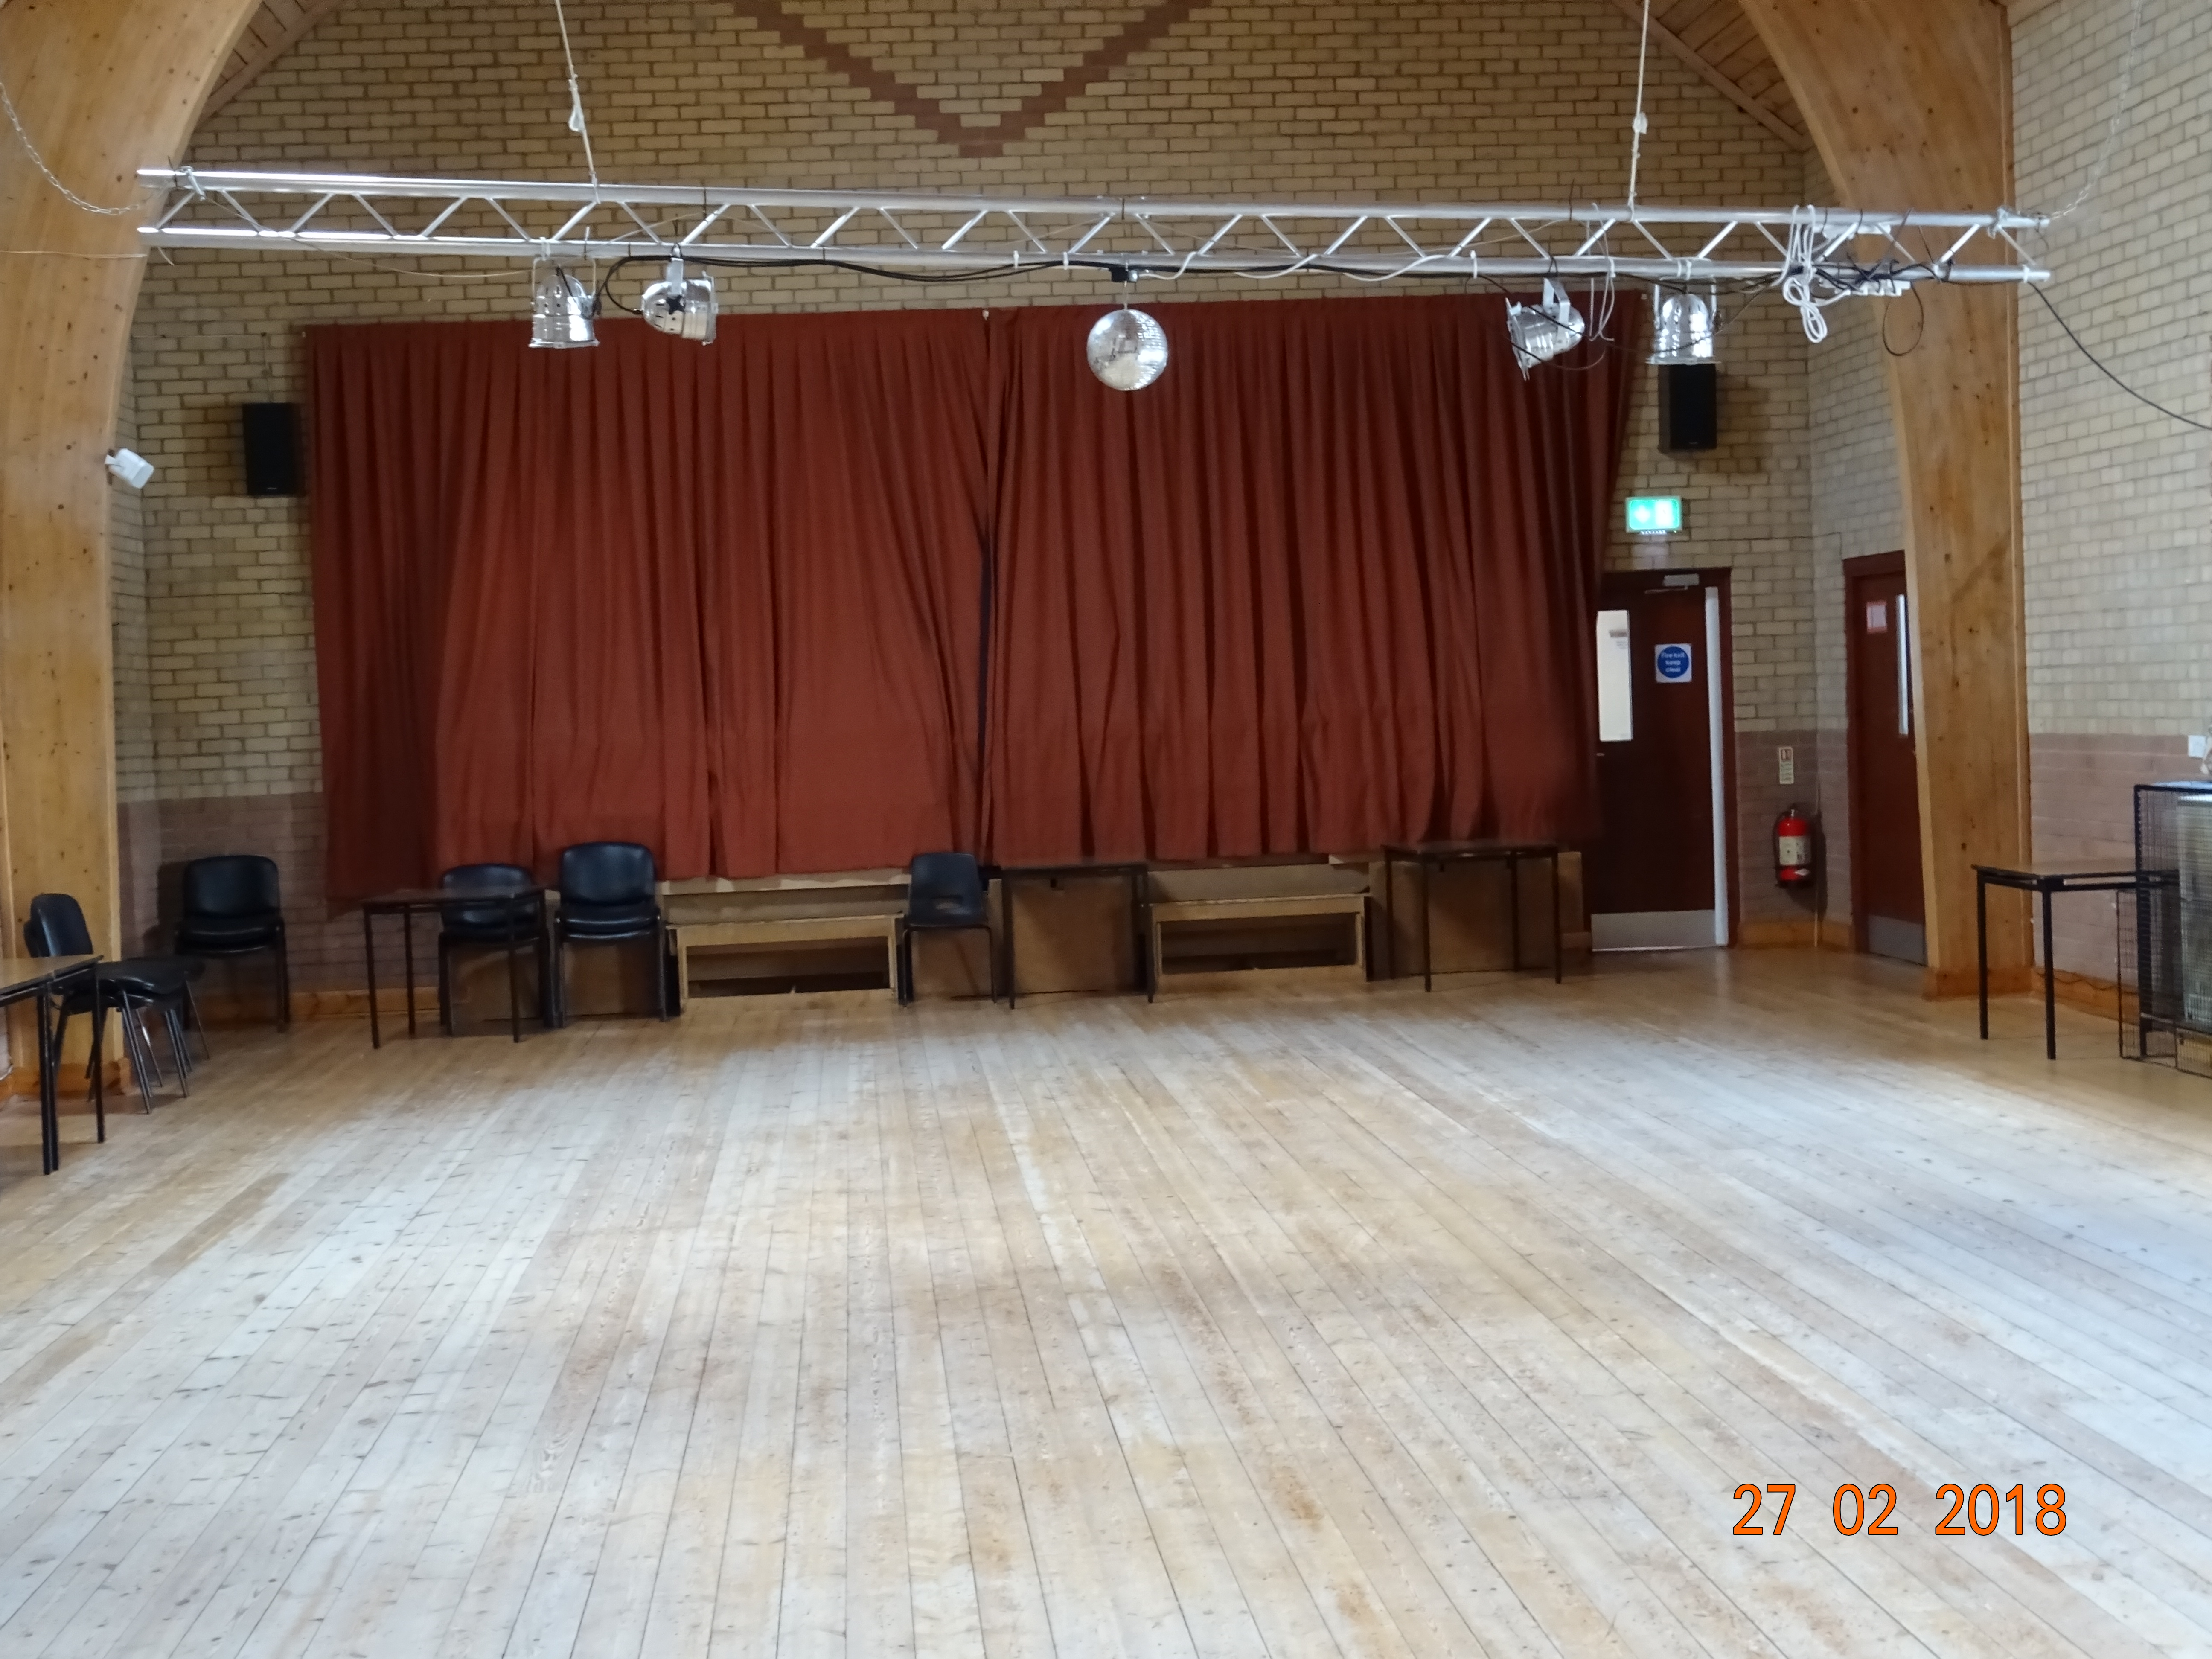 Main Hall showing stage